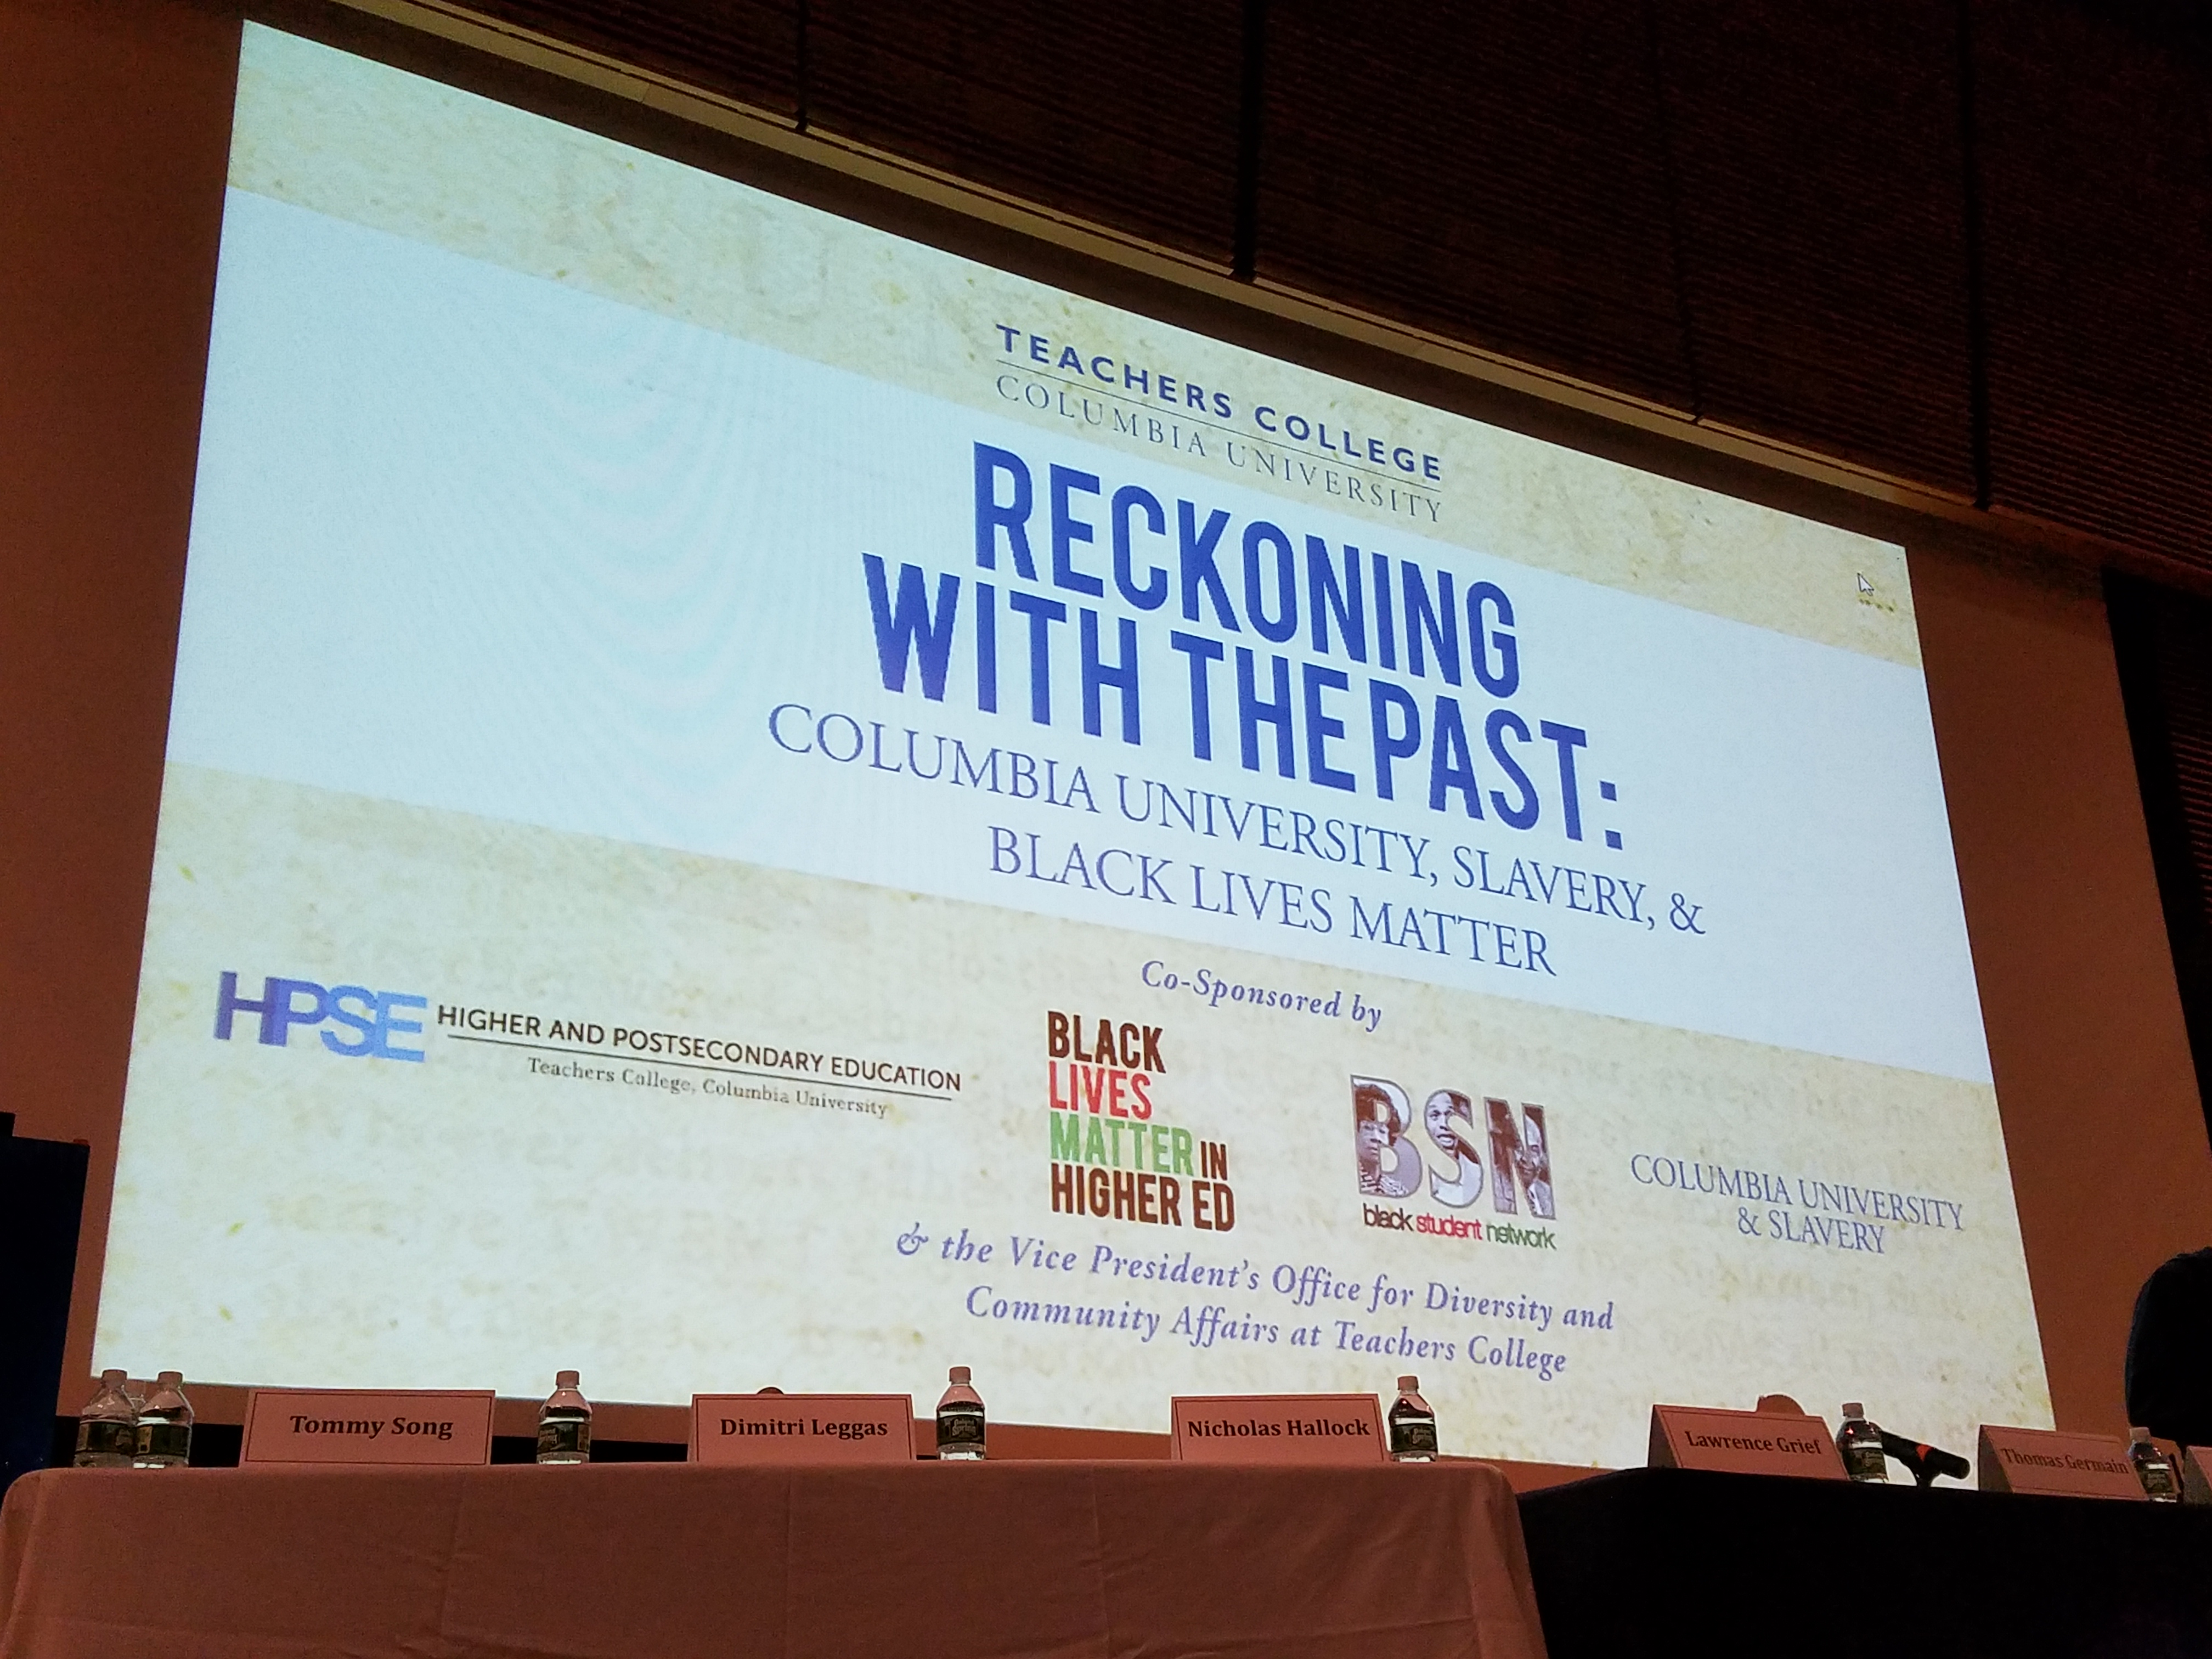 Reckoning With the Past: Columbia University, Slavery, and Black Lives Matter